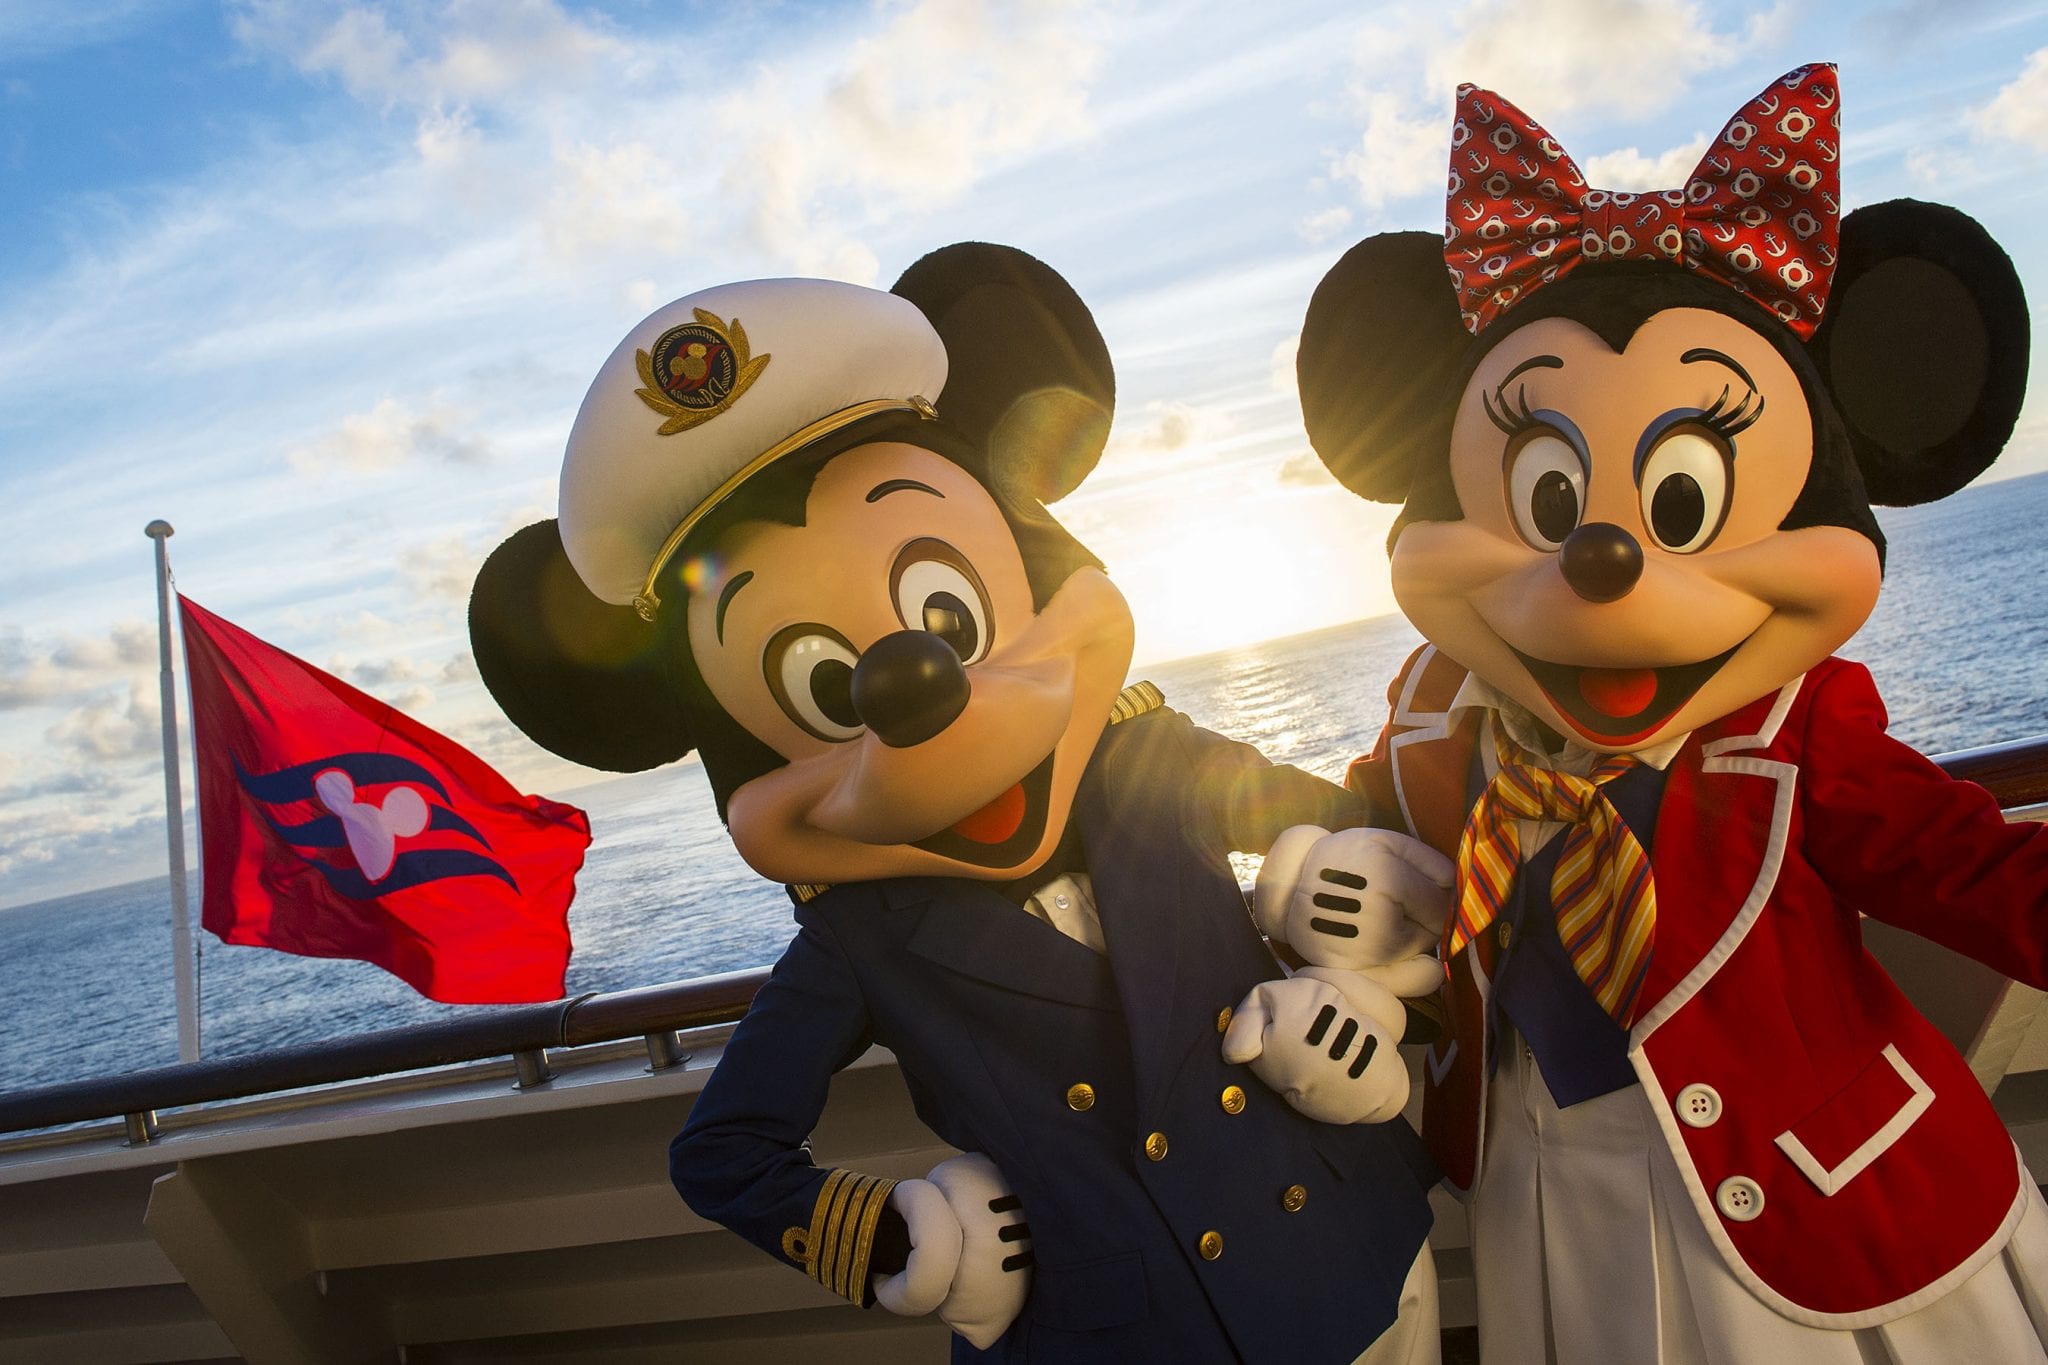 The Disney Magic crew wouldn’t be complete without Captain Mickey and First Mate Minnie, who greet guests onboard the ship. Special visits from favorite Disney characters are guaranteed to delight the entire family every day on the Disney Magic. (Matt Stroshane, photographer)